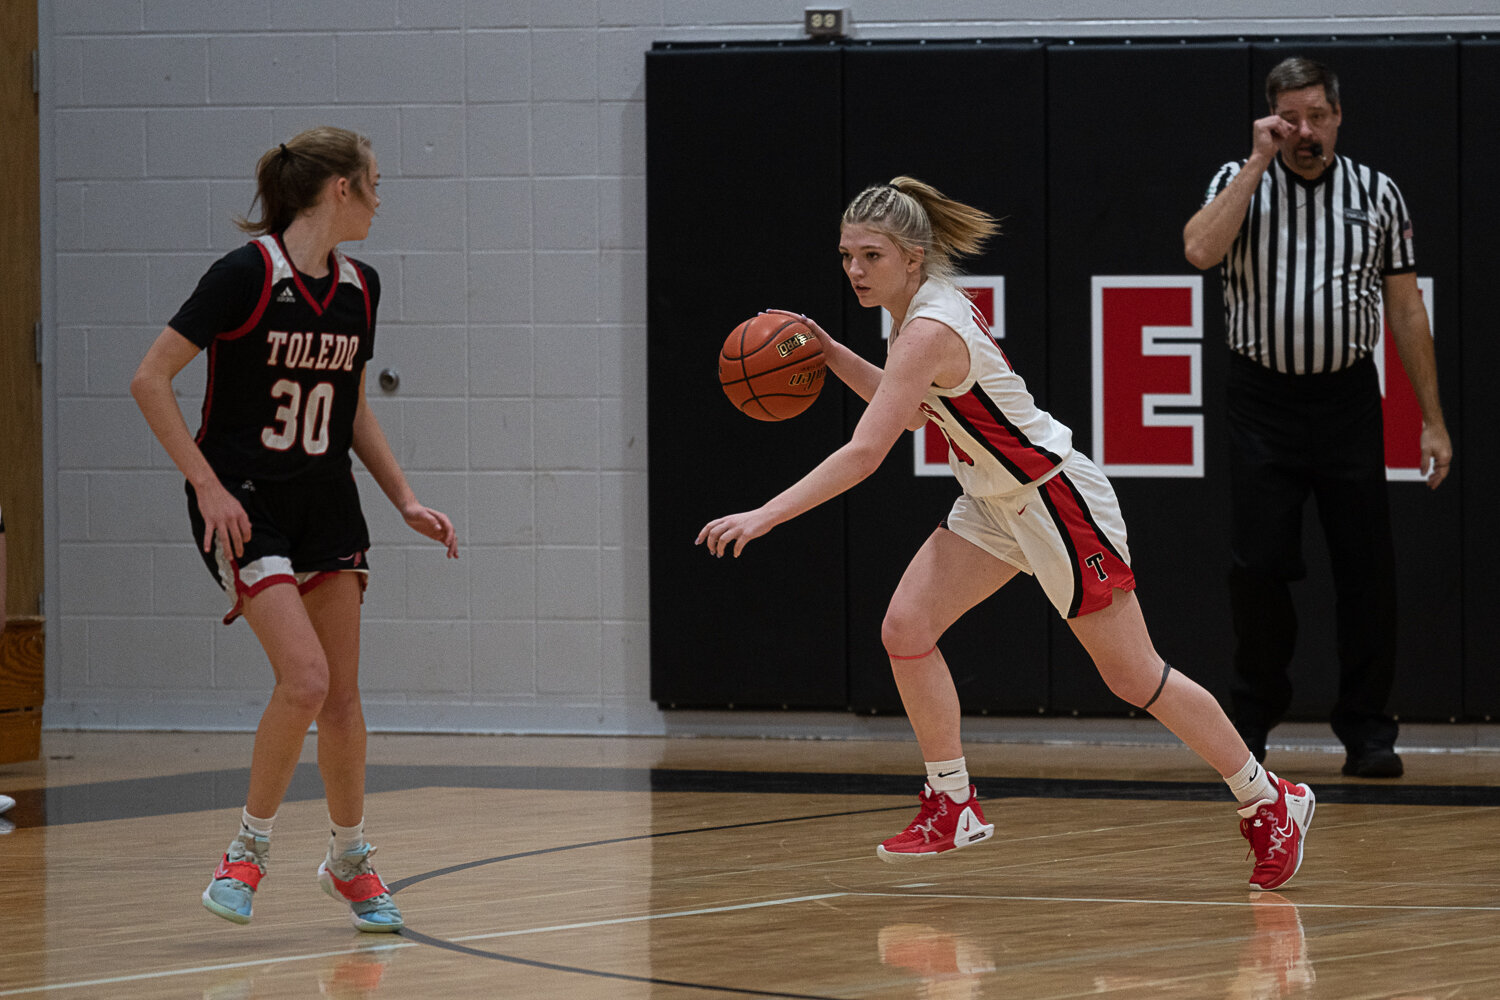 Brianna Asay starts a fast break after securing a rebound during Tenino's loss to Toledo on Nov. 29.